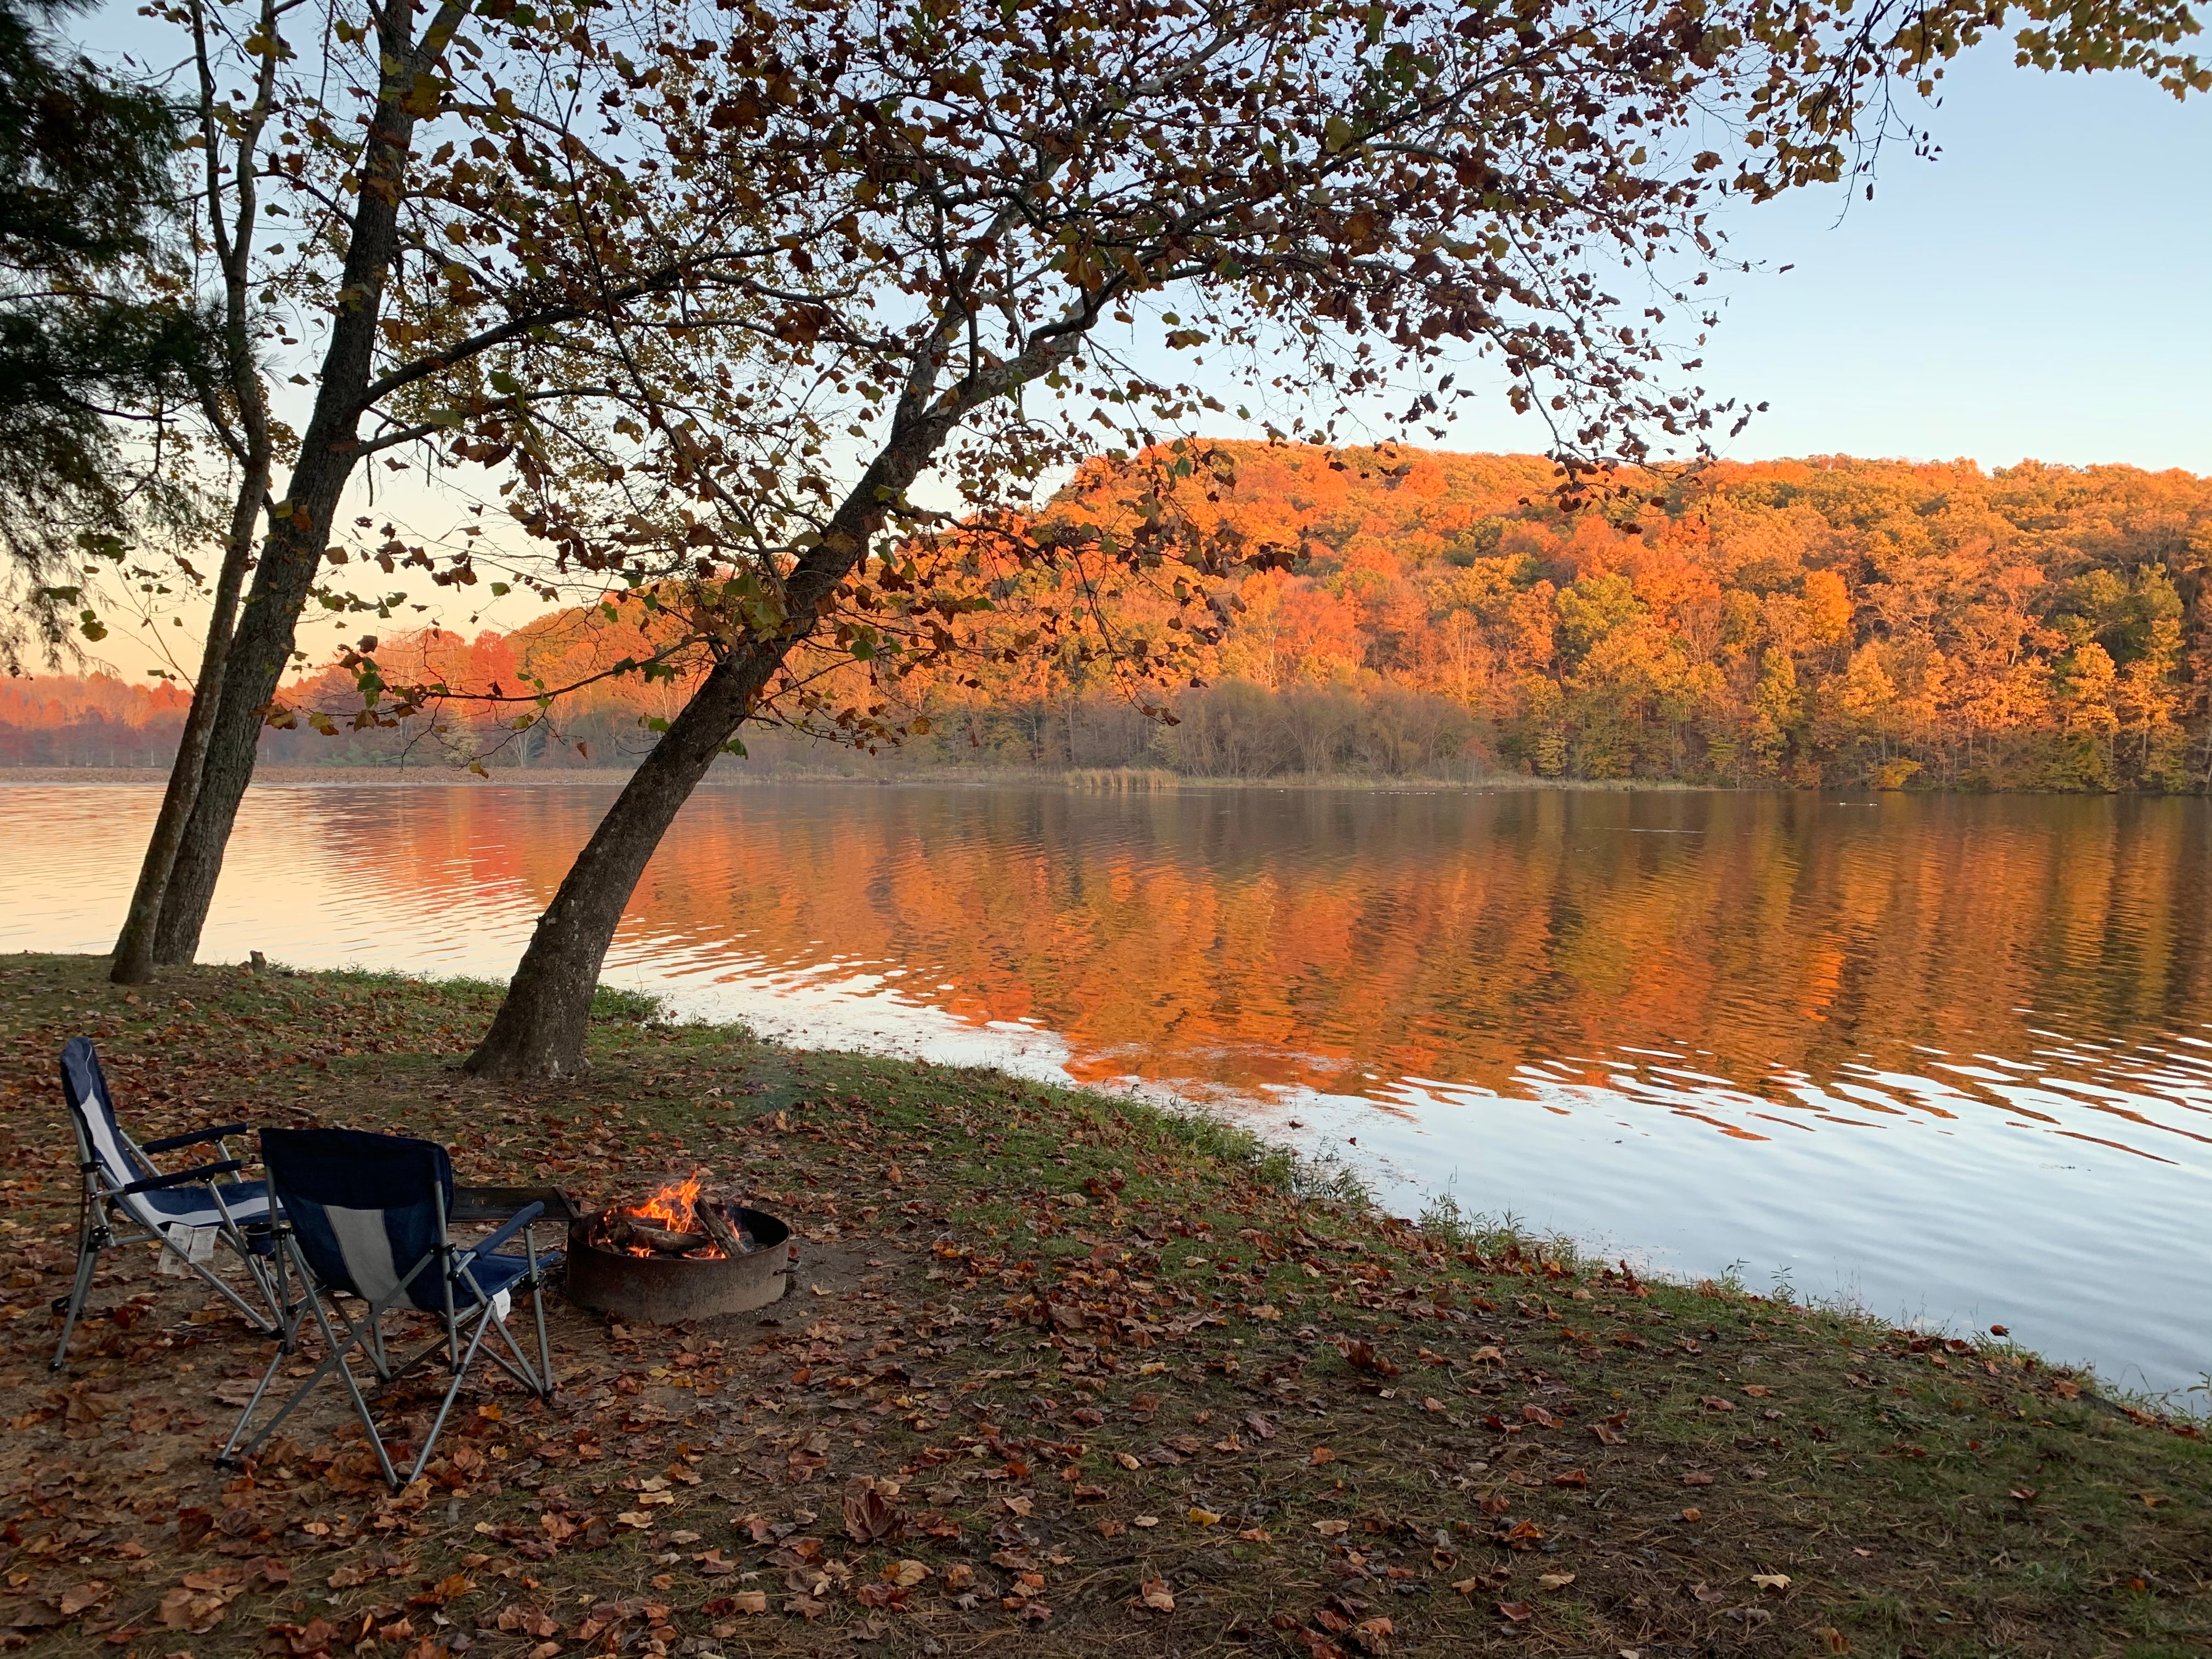 A beautiful fall evening as the sun sets on campsite #28 in November 2019.